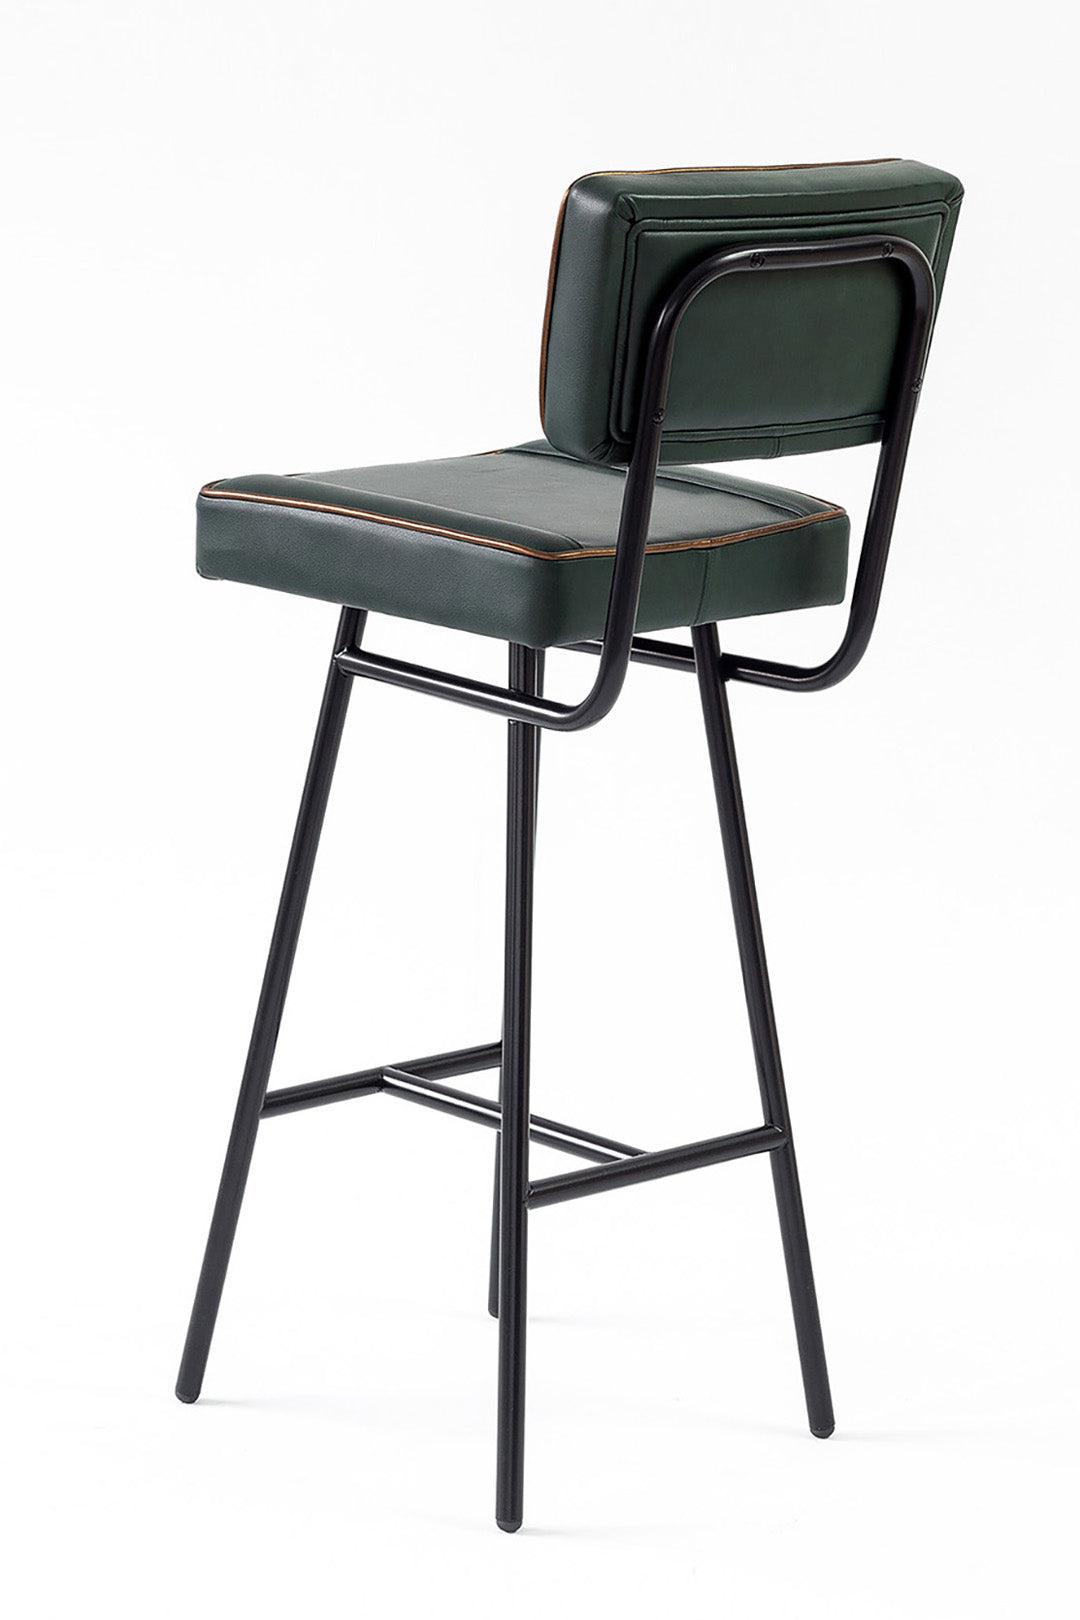 S-tool BL High Stool-Toposworkshop-Contract Furniture Store